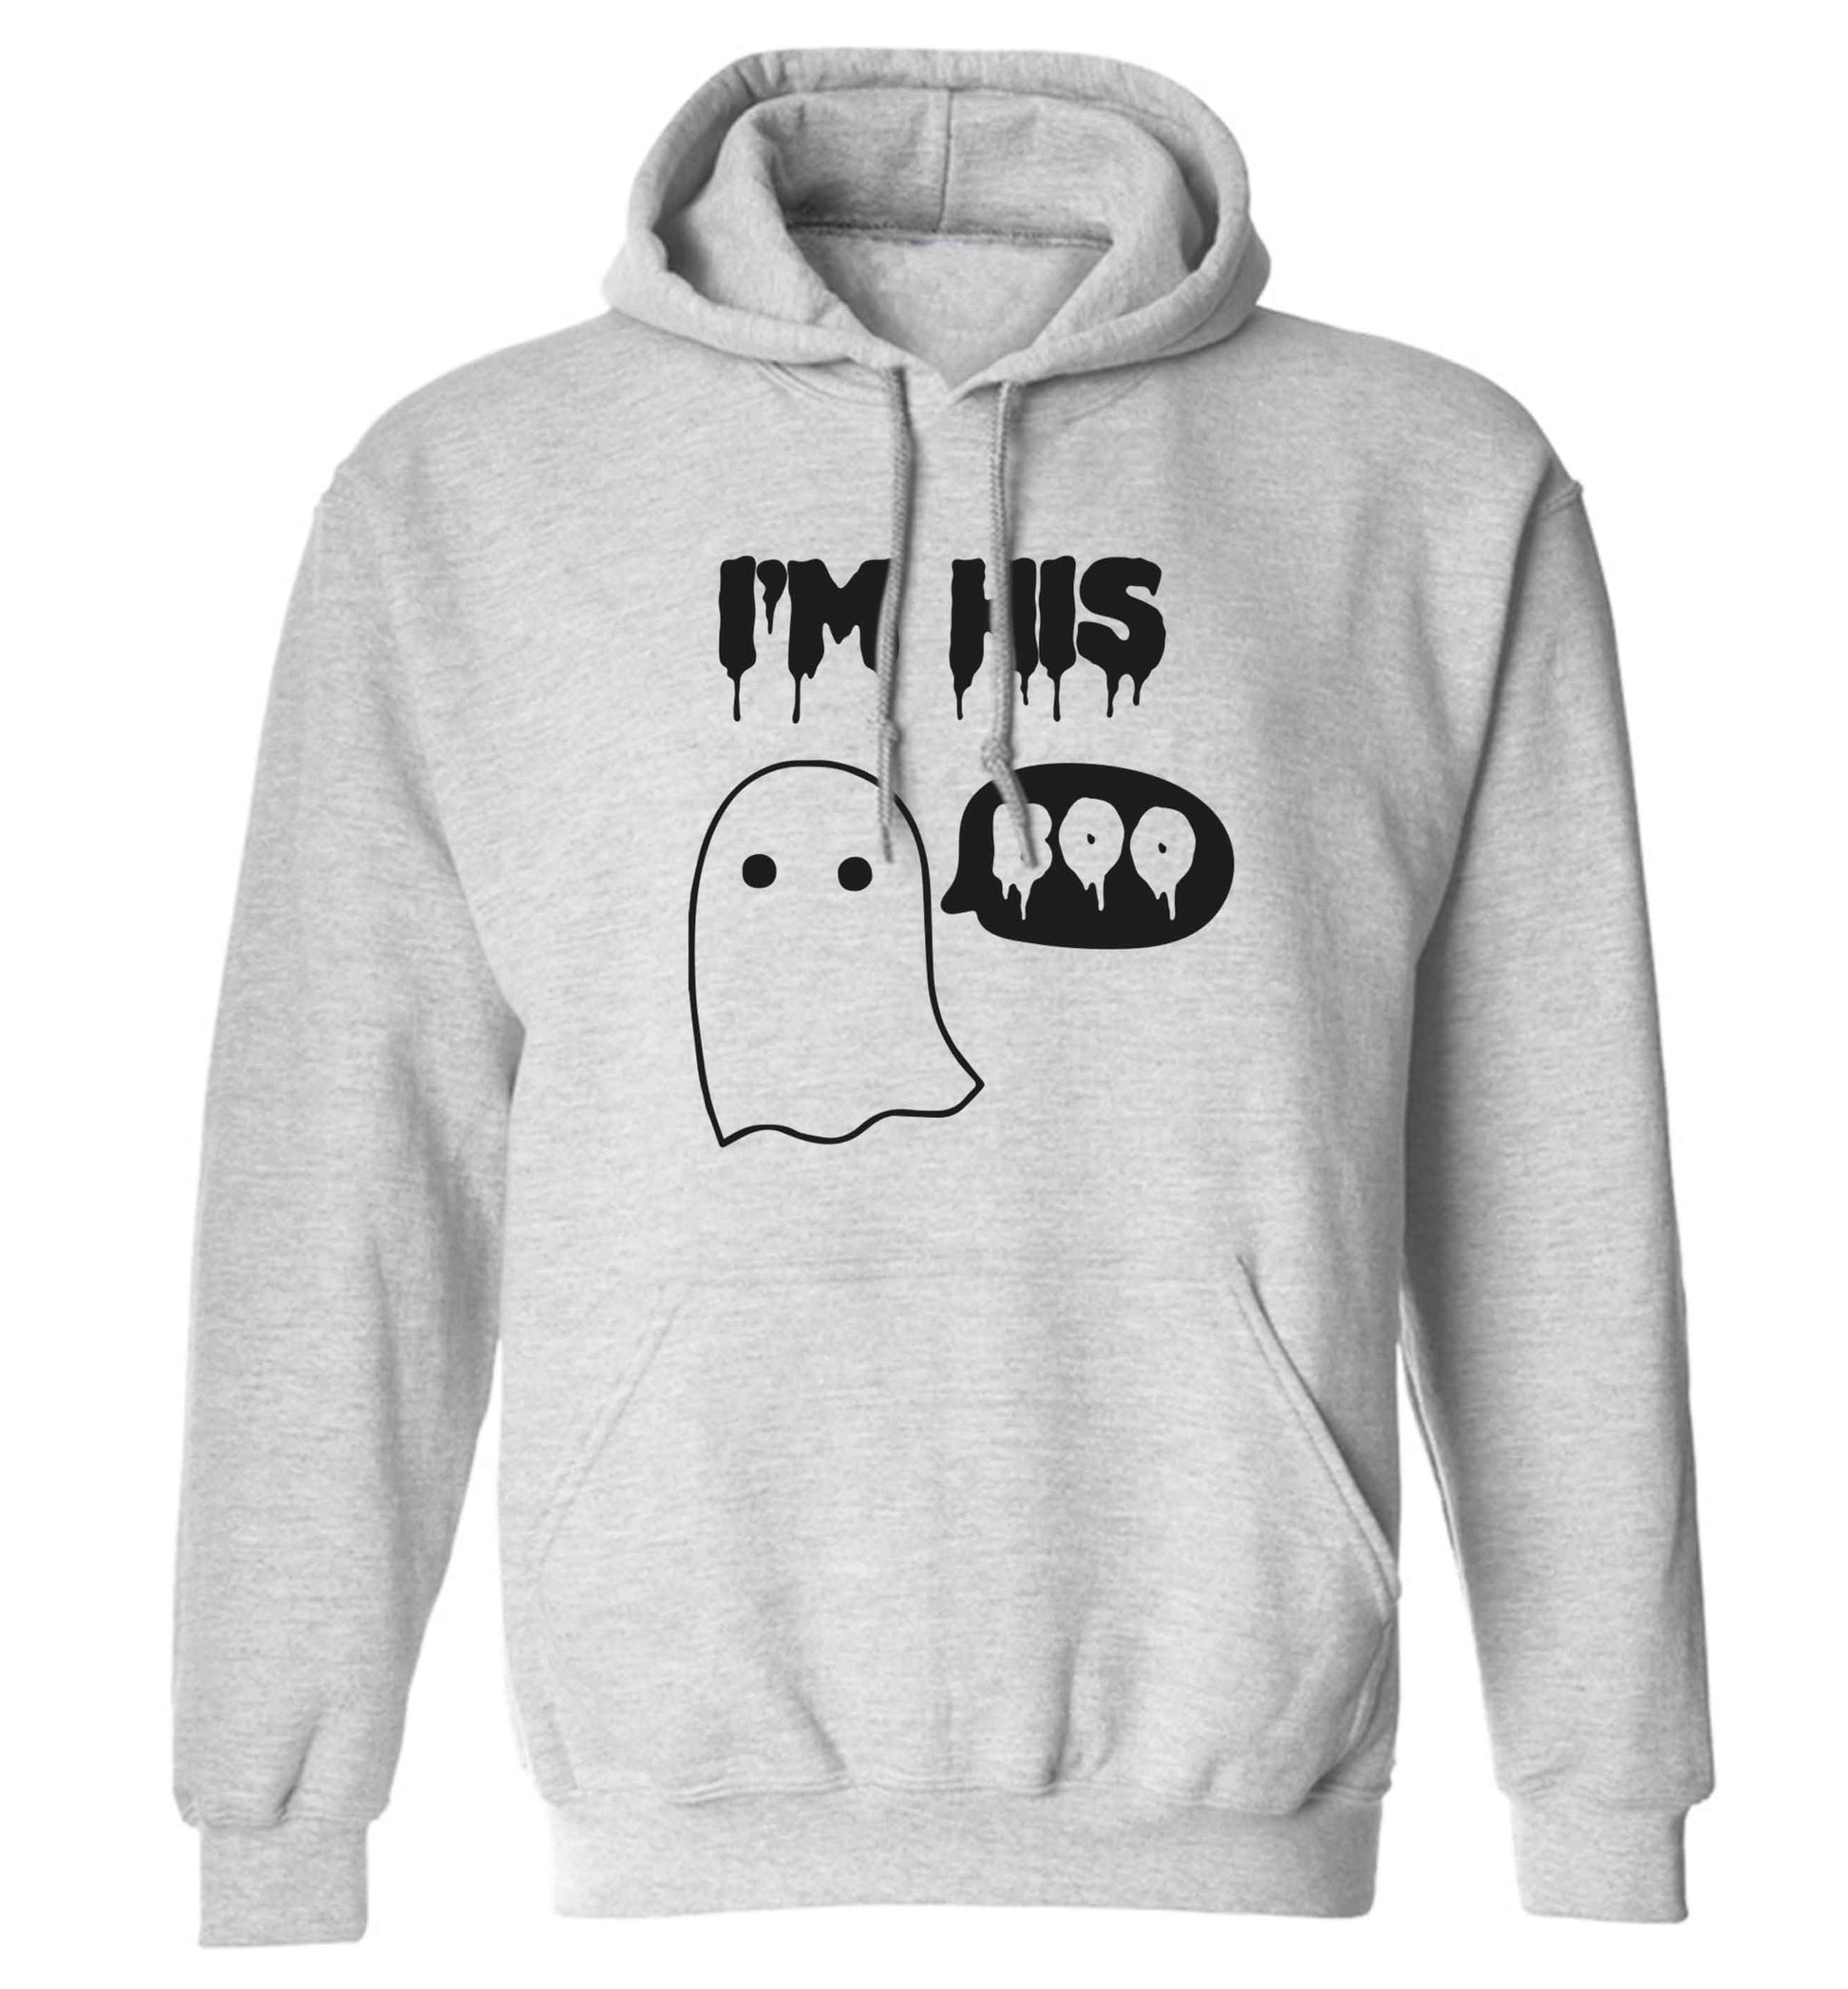 I'm his boo adults unisex grey hoodie 2XL